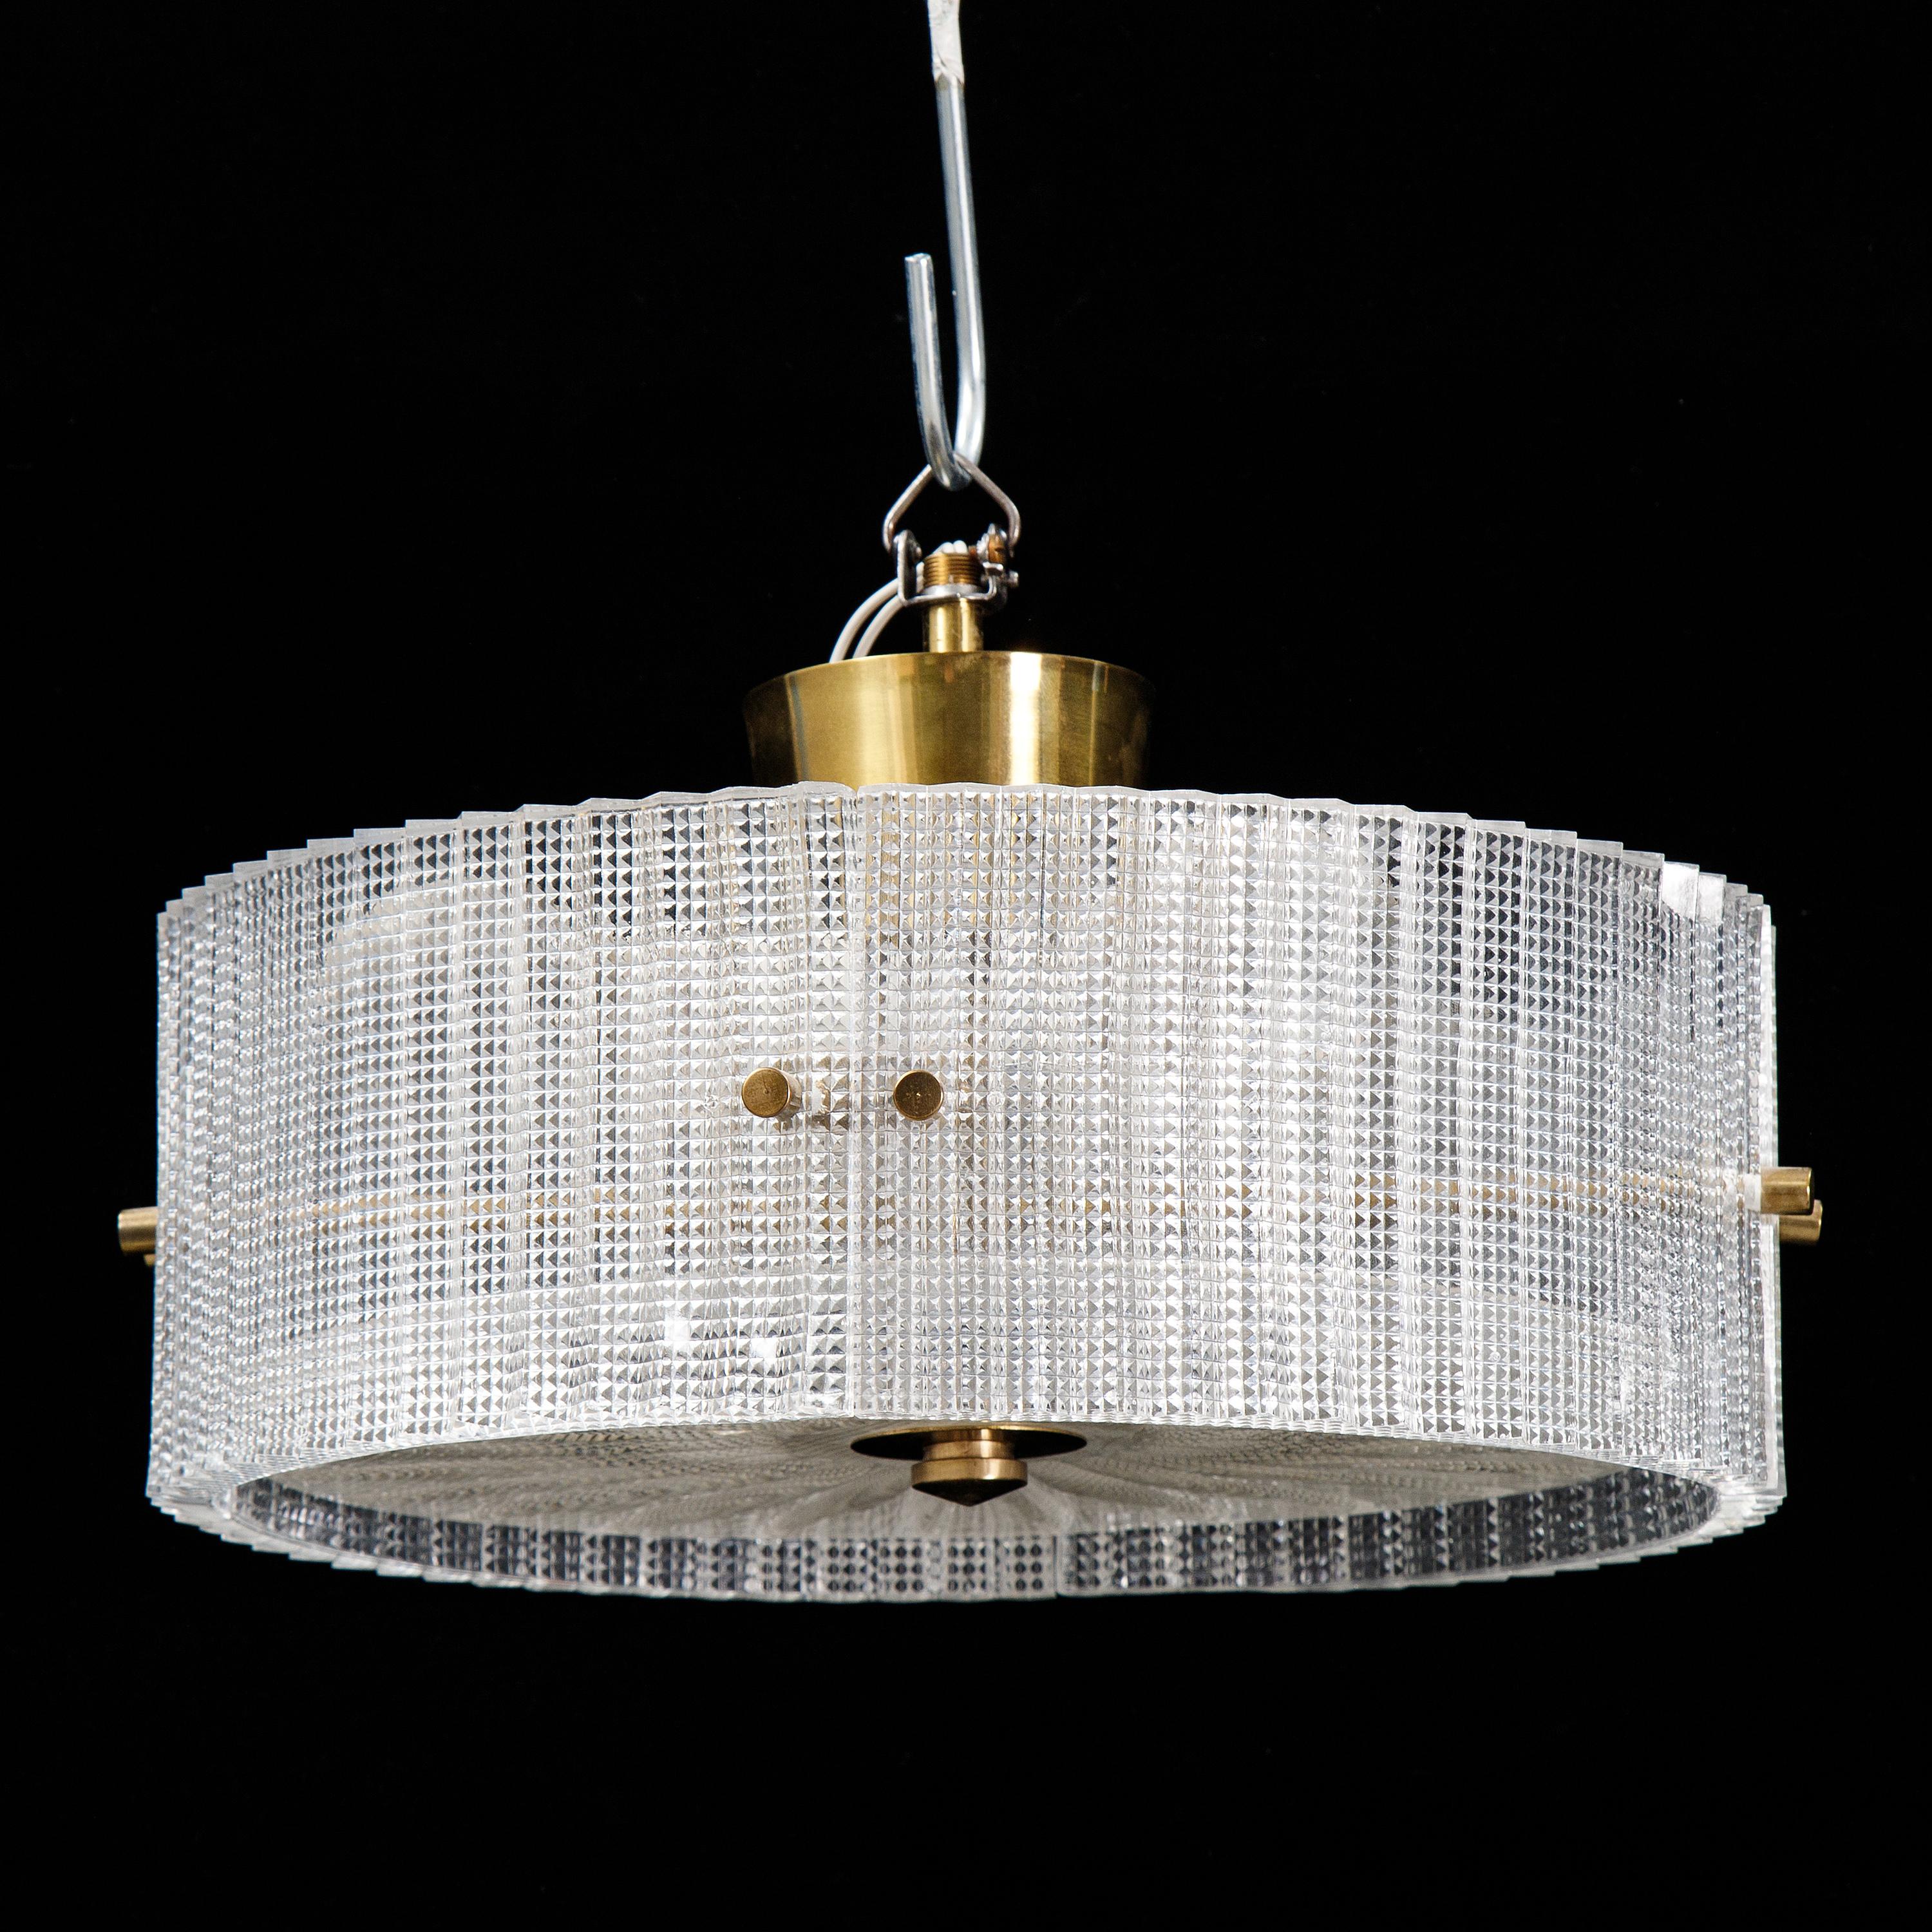 Swedish Carl Fagerlund Ceiling Light for Orrefors Glass and Brass, Sweden, 1960 For Sale